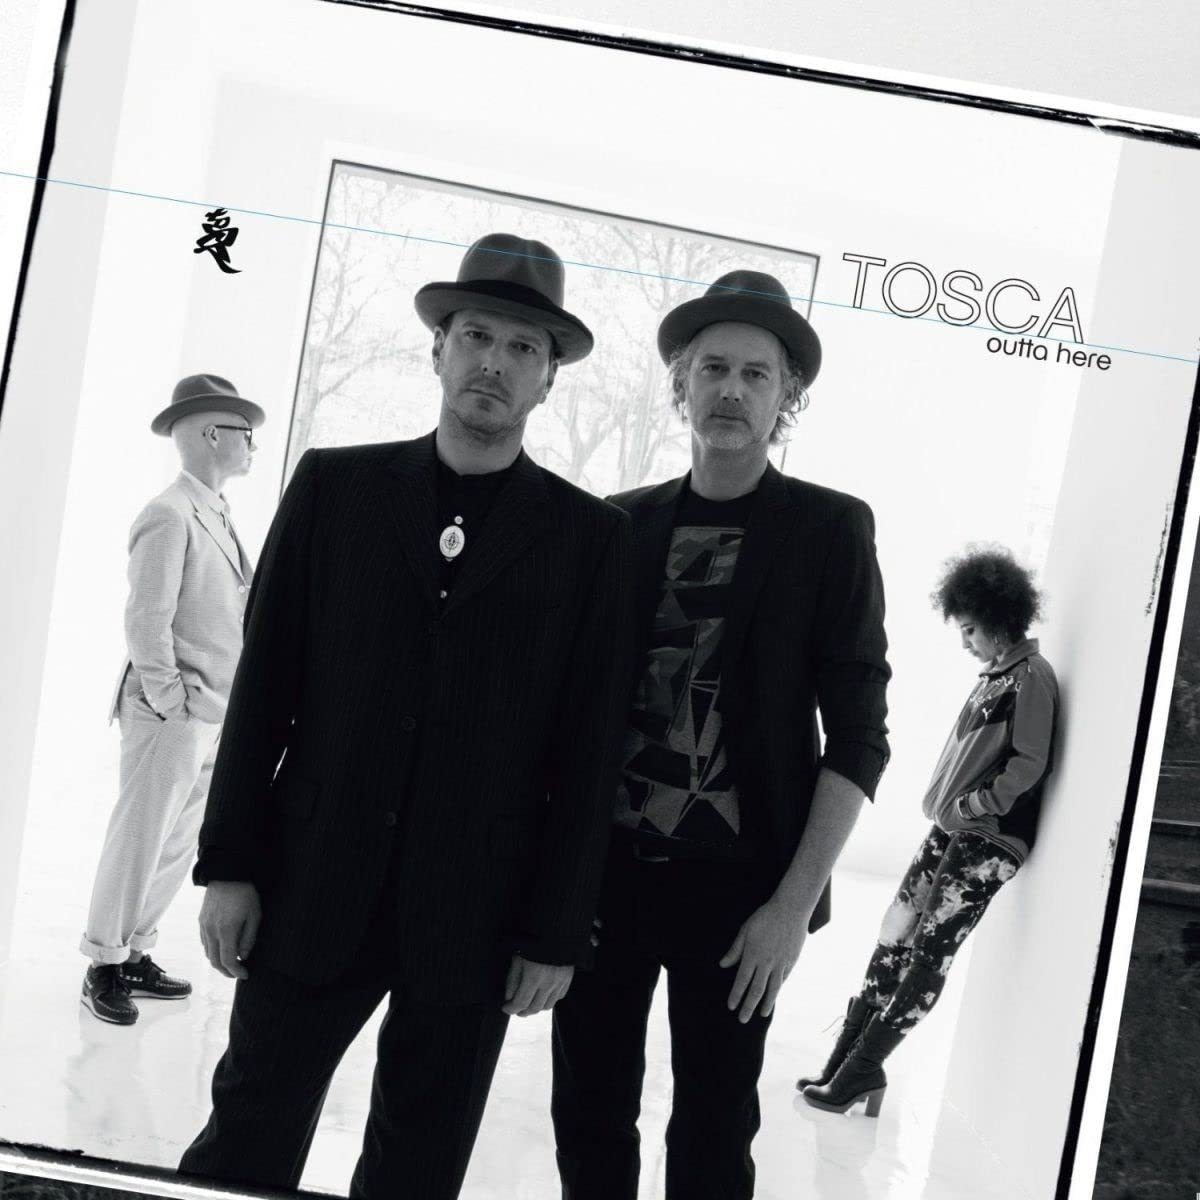 TOSCA – OUTTA HERE LP2